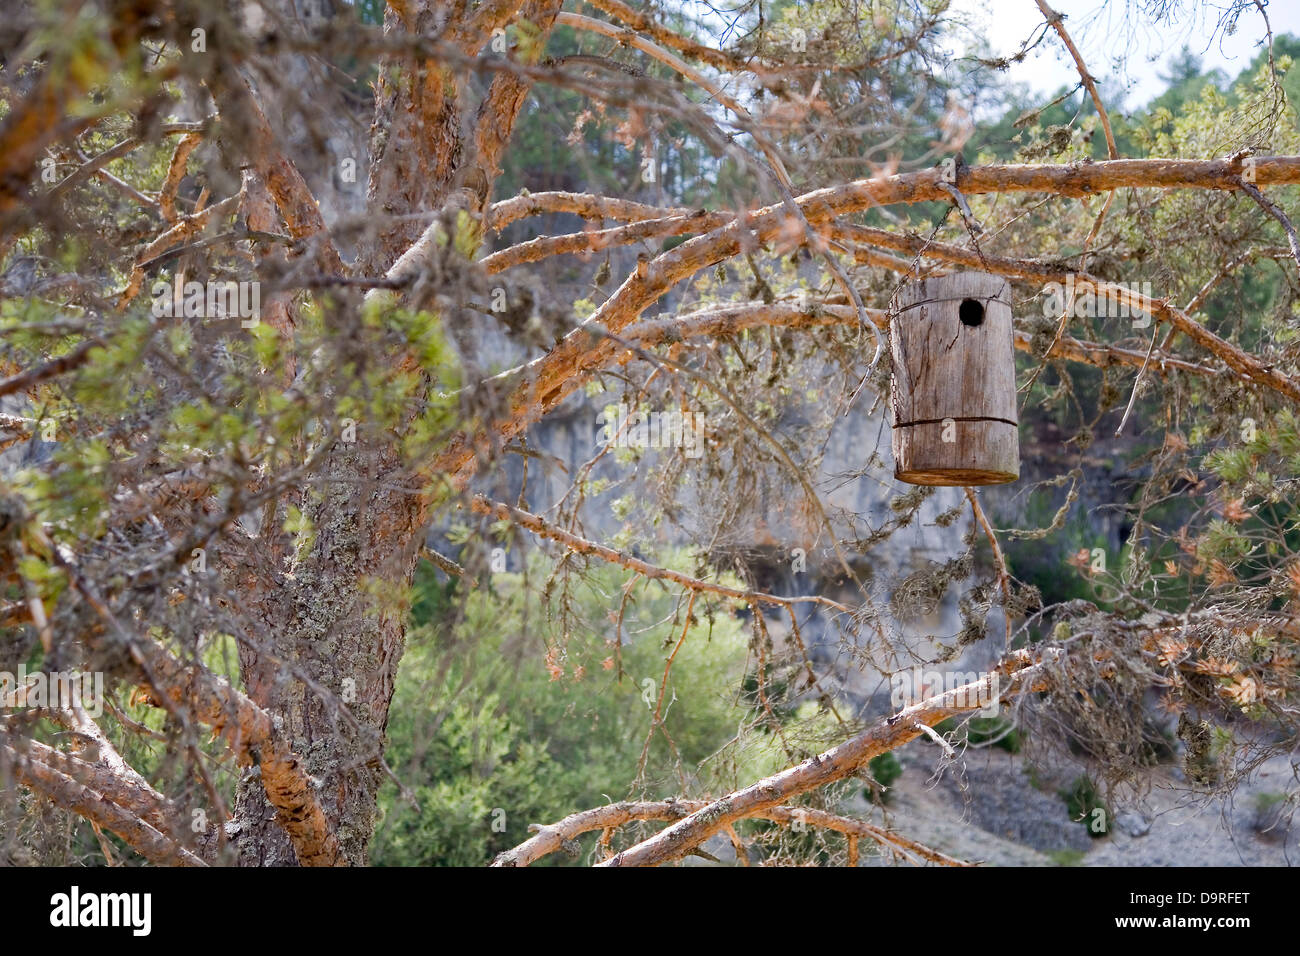 Nestbox in a tree. Stock Photo